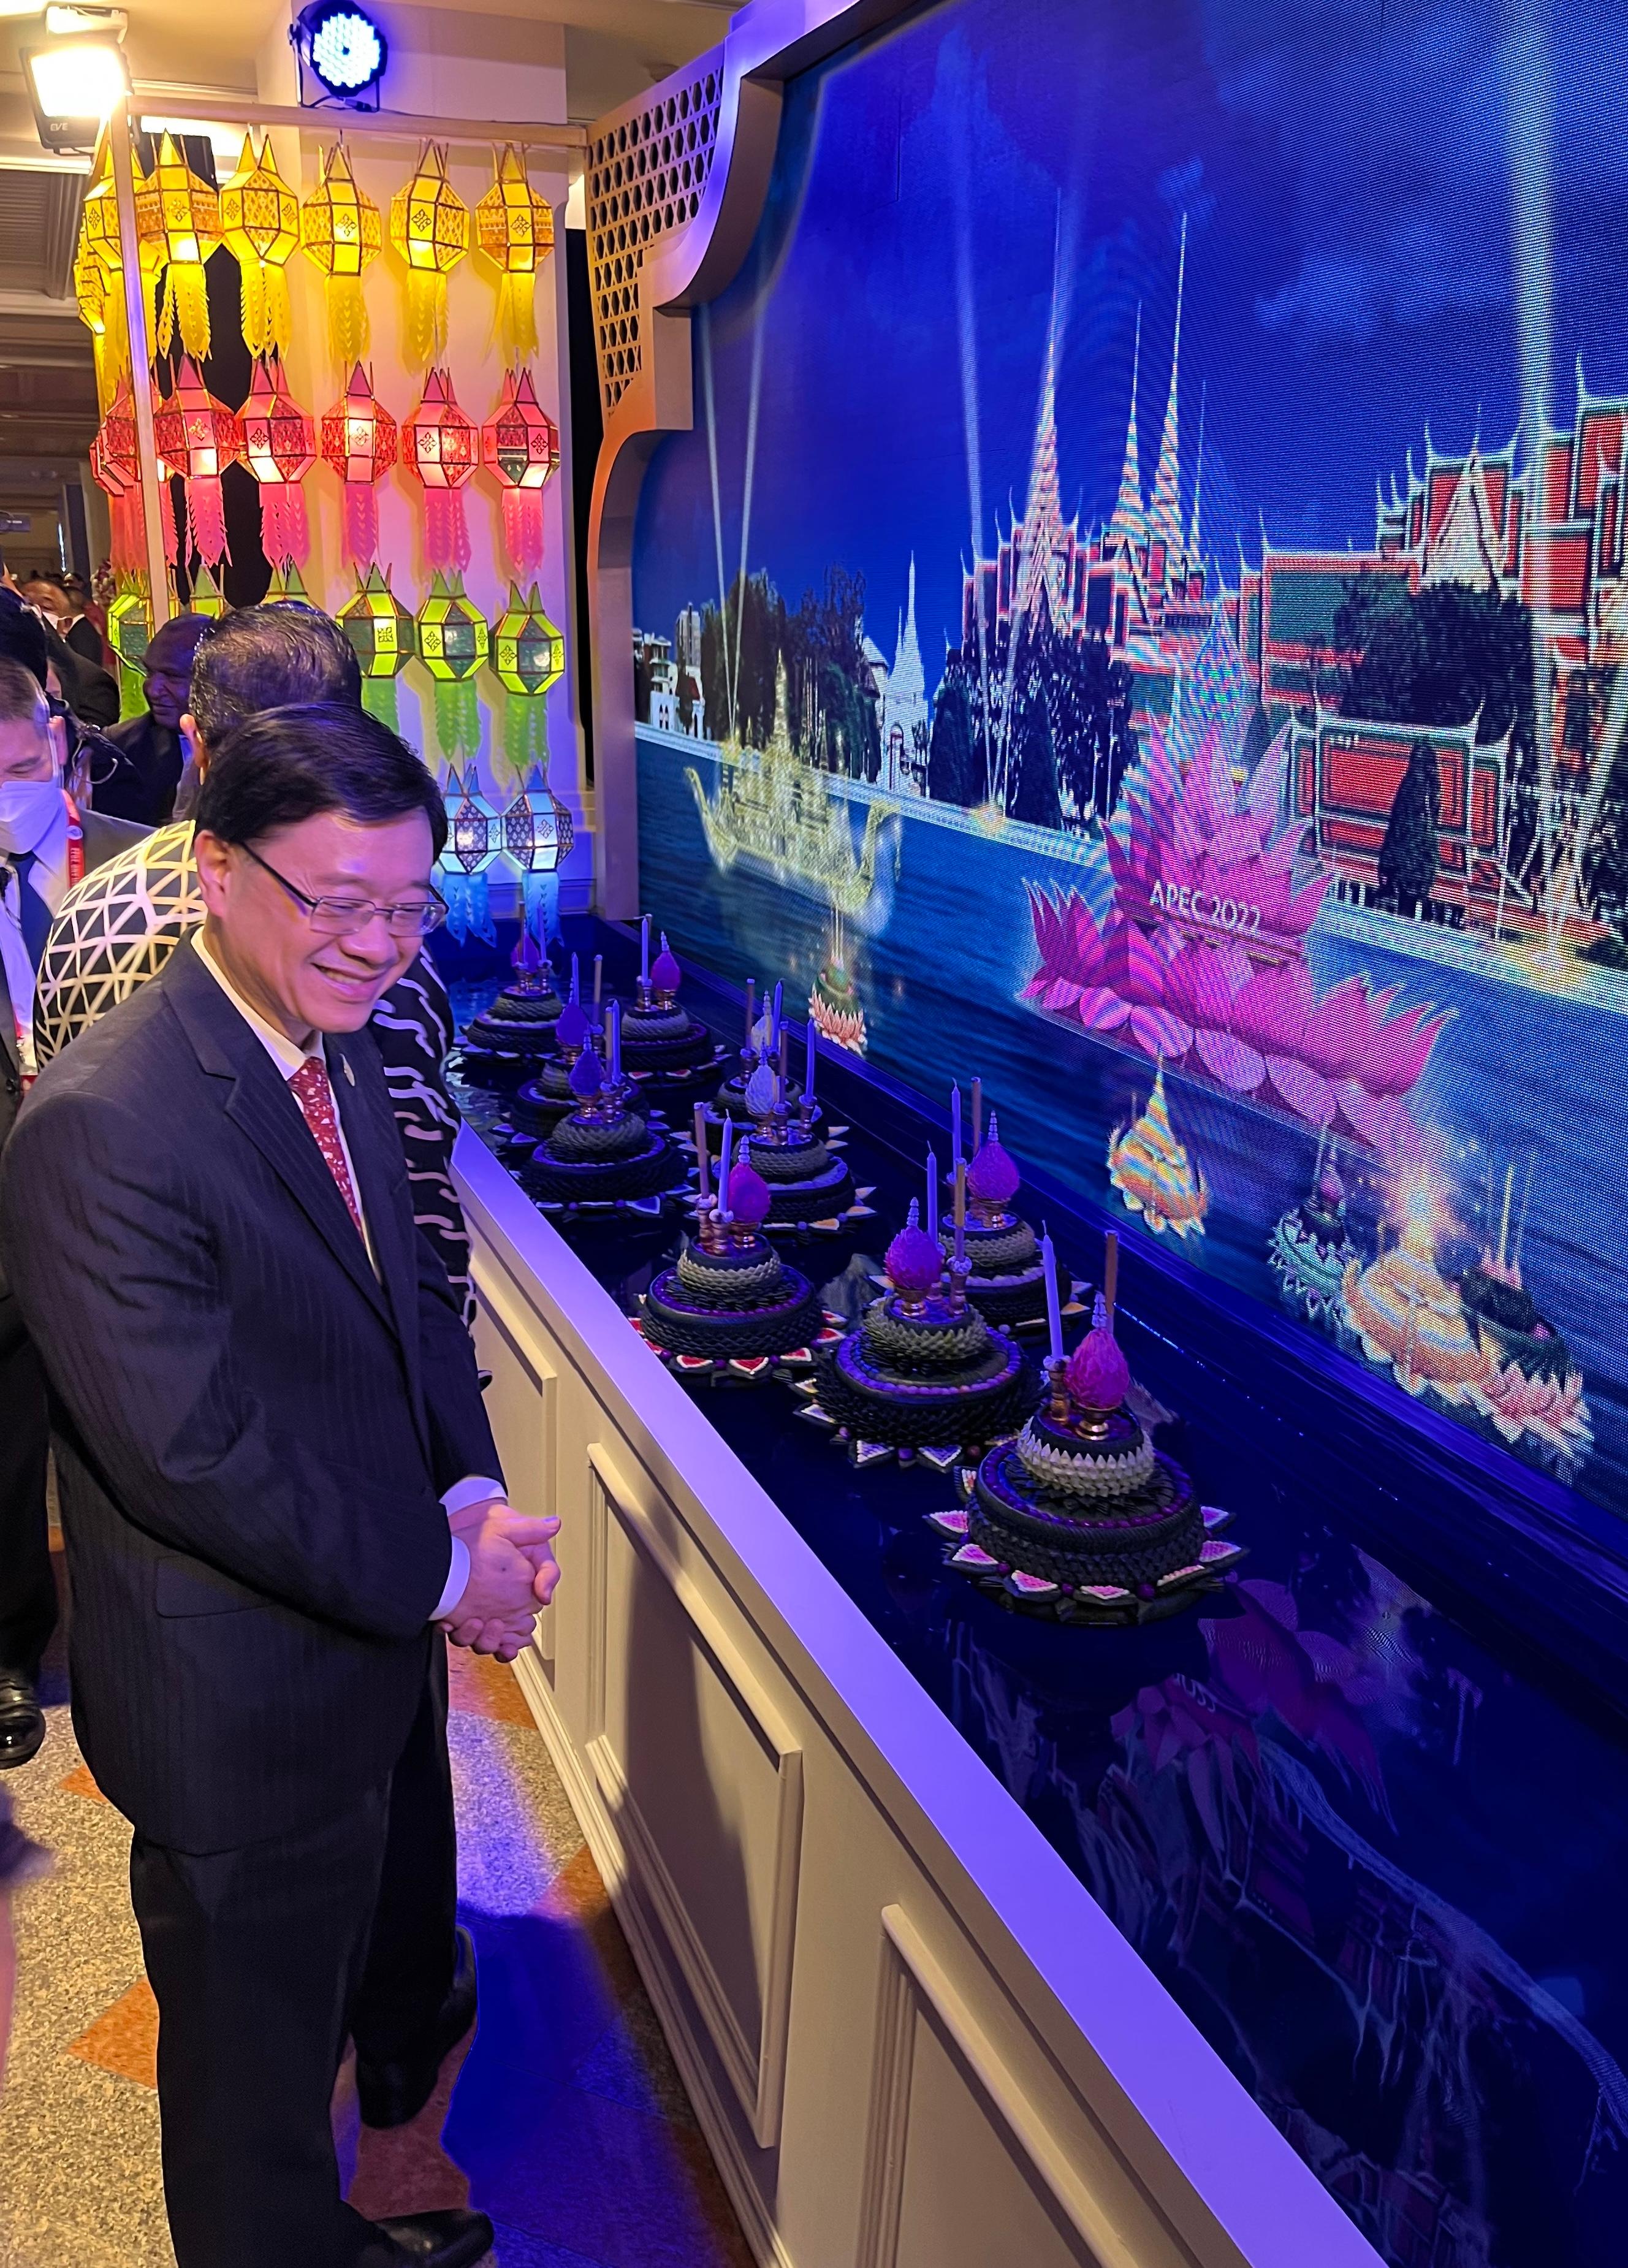 The Chief Executive, Mr John Lee, attended the Asia-Pacific Economic Cooperation 2022 Economic Leaders' Meeting gala dinner and cultural performance in Bangkok, Thailand, this evening (November 17). Photo shows Mr Lee viewing the cultural arts at the venue of the gala dinner.